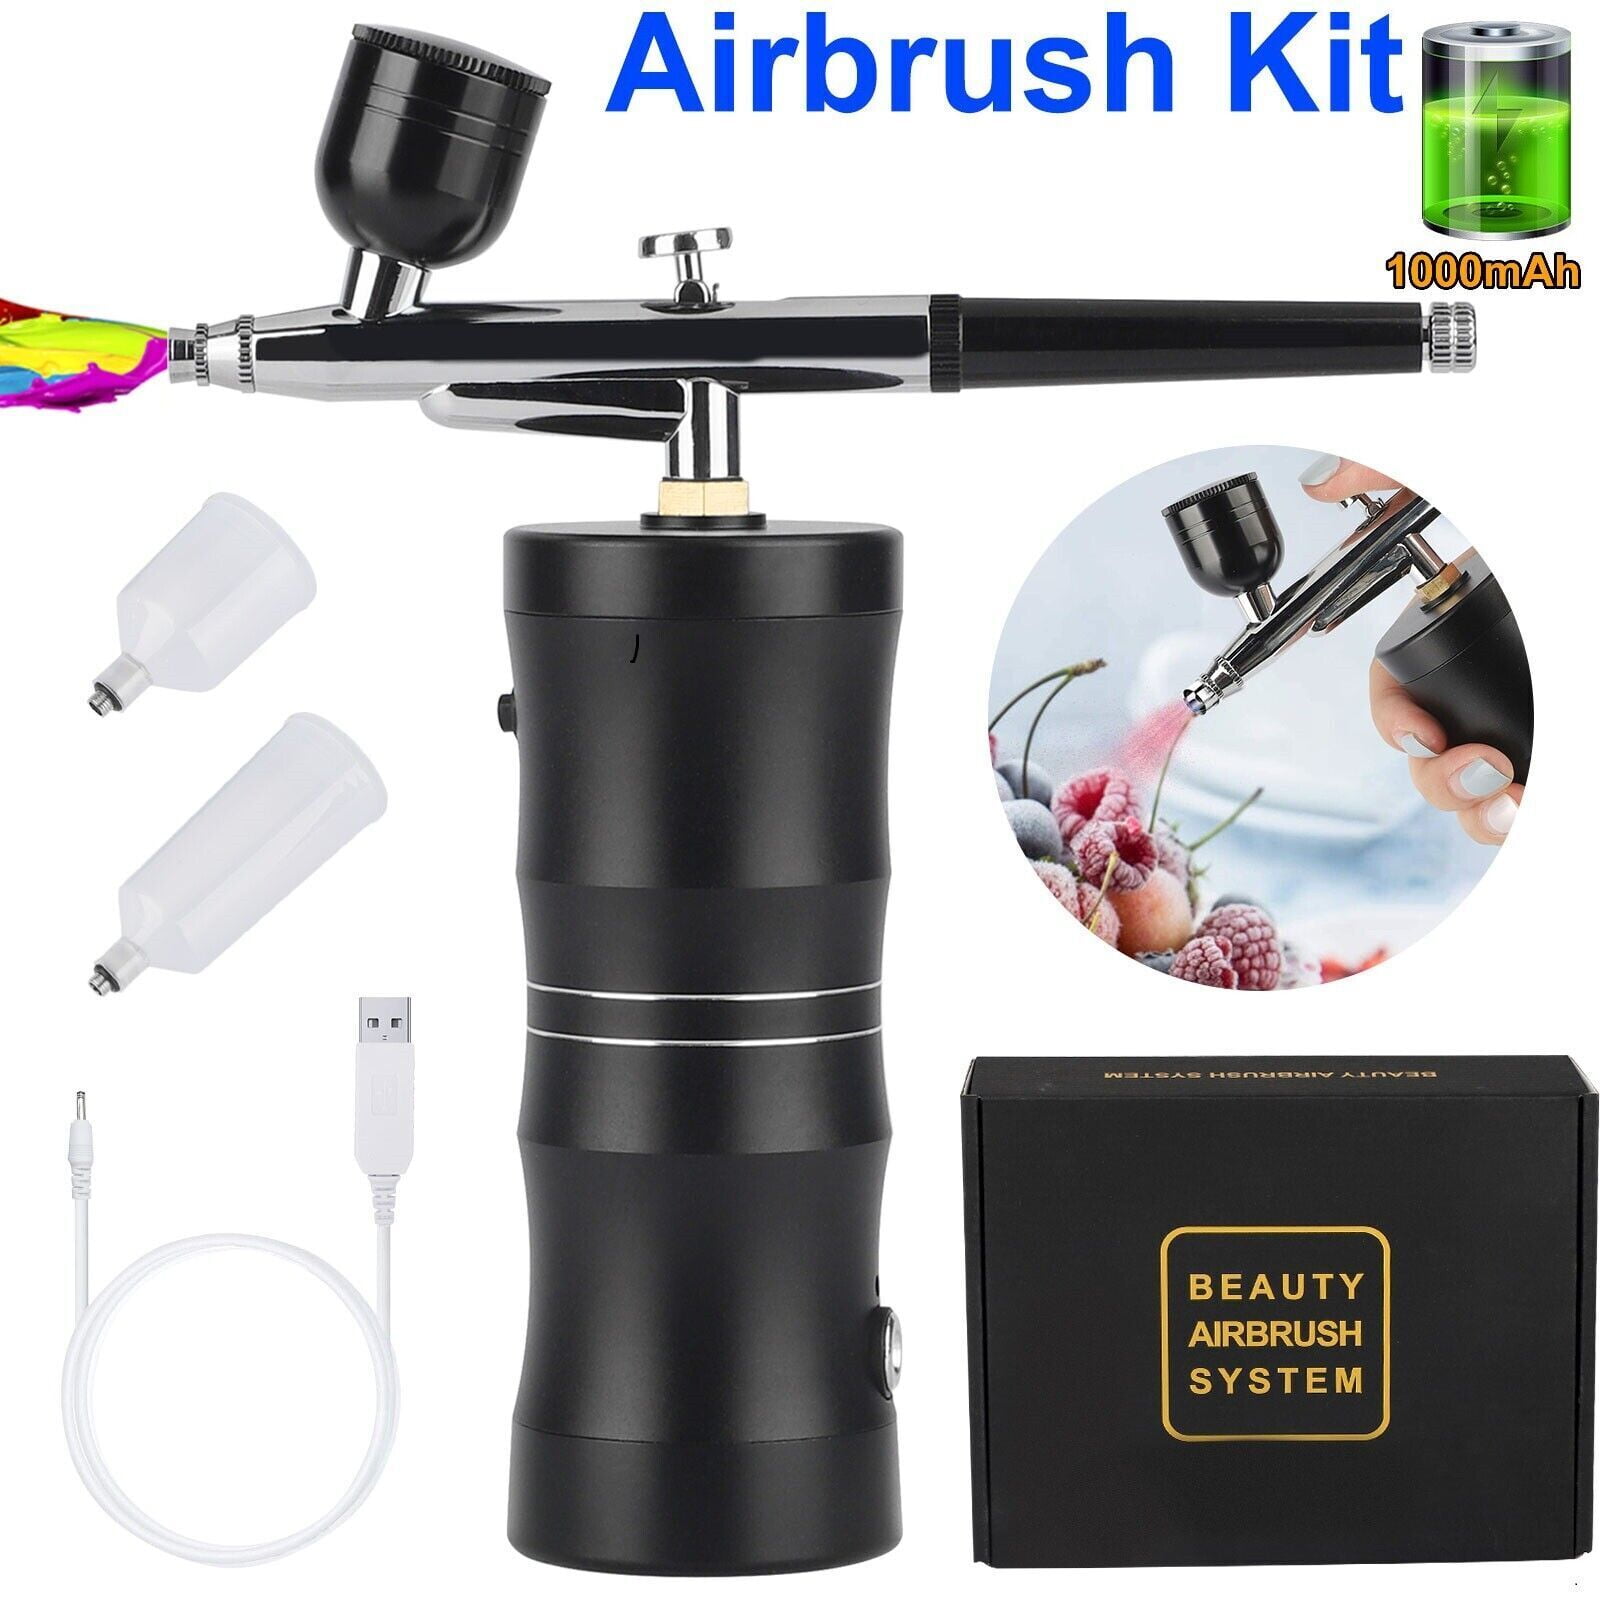 Costway Airbrush Spray Booth Kit Portable with LED Light&Filter Hose for  Model Painting DIY